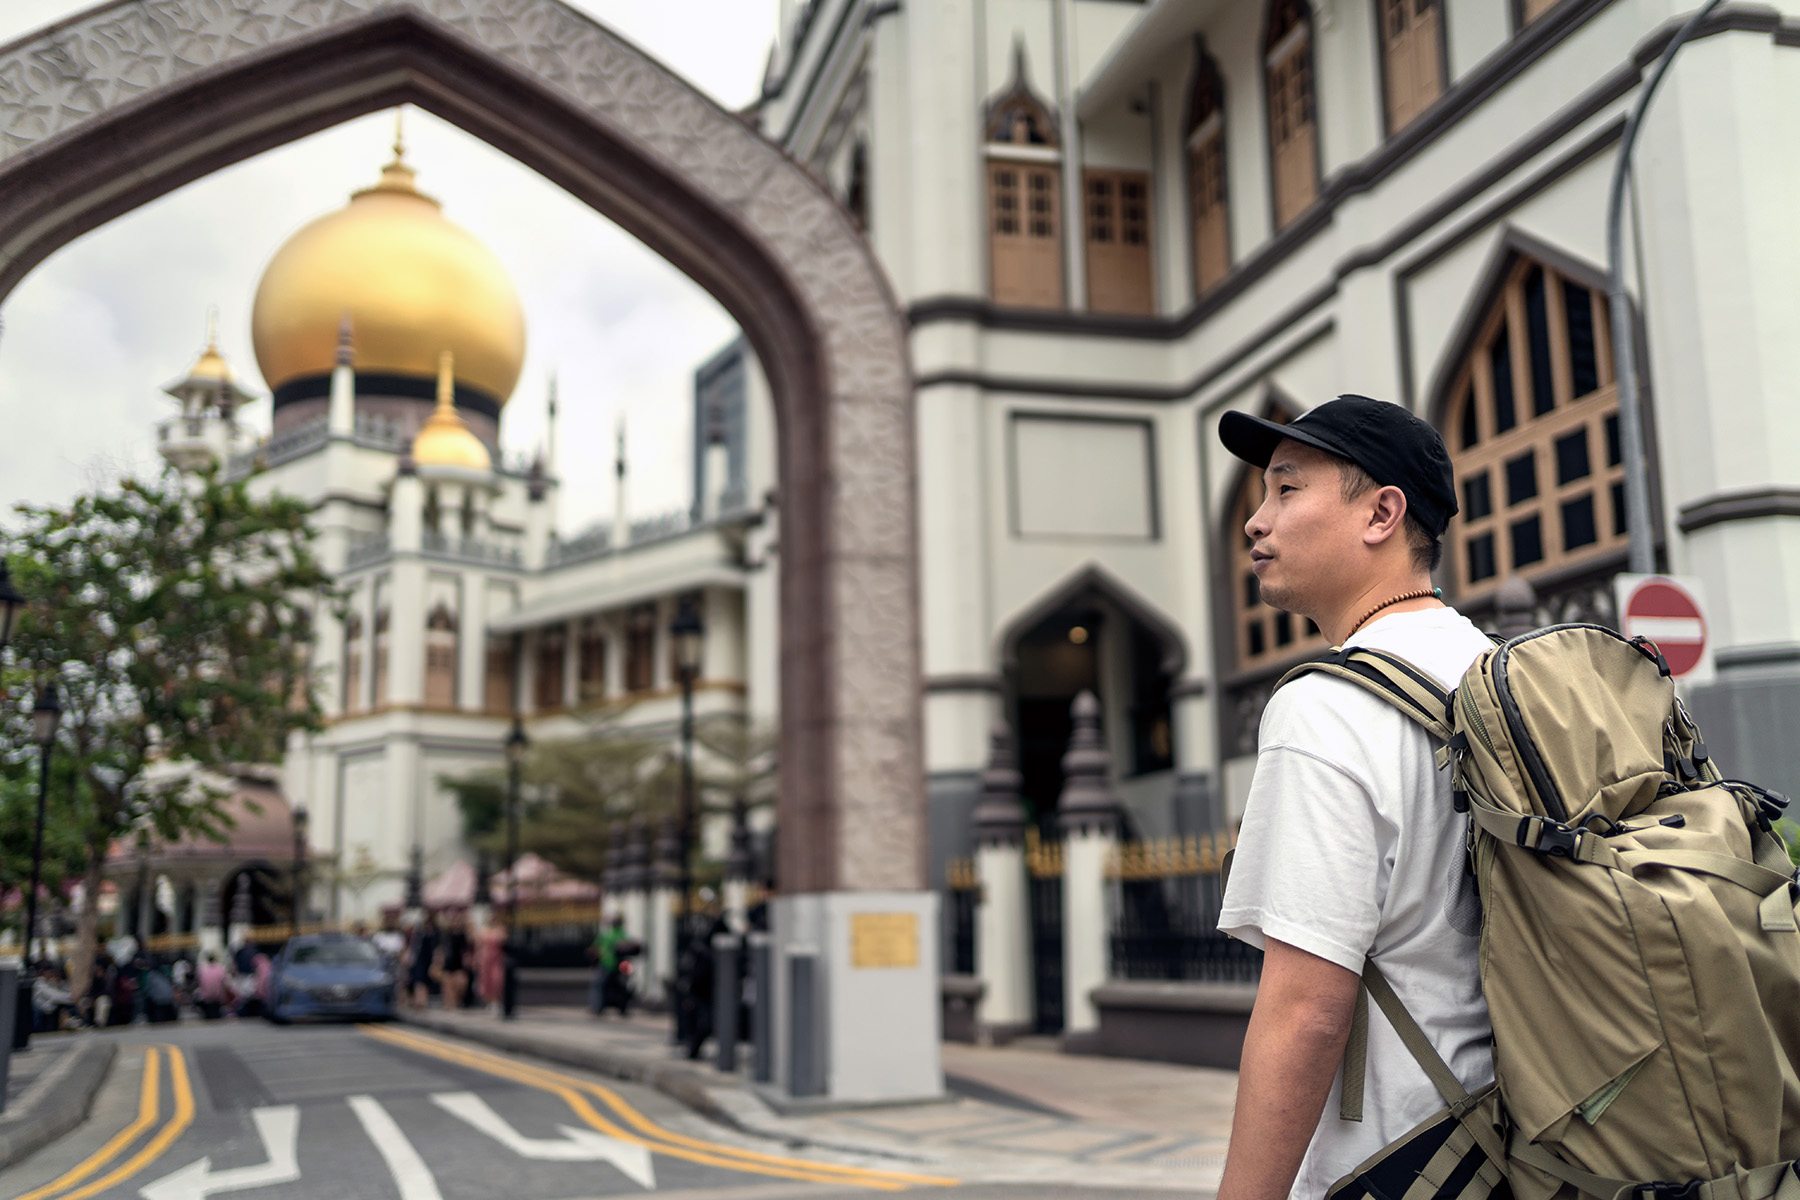 Tourist with a backpack looking around the area of the Sultan Mosque in Singapore.